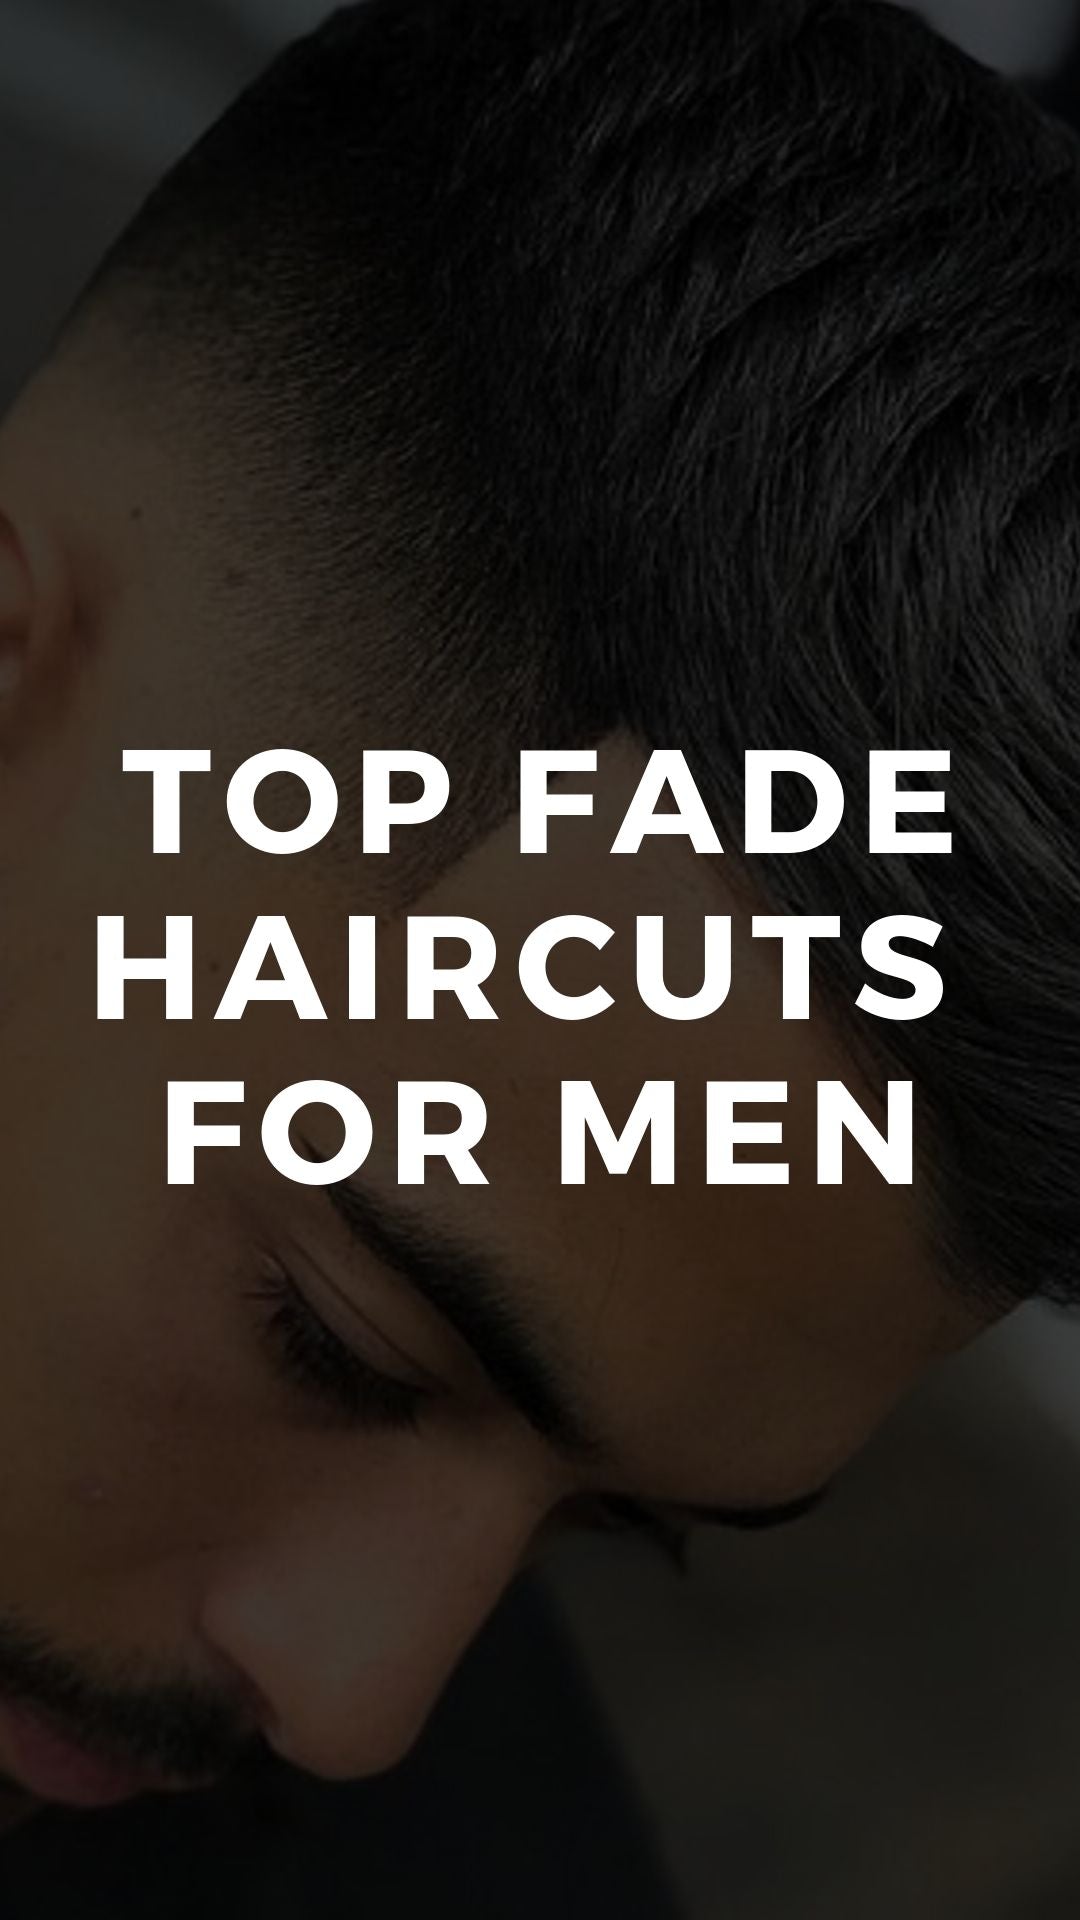 BEST FADE HAIRCUTS FOR MEN